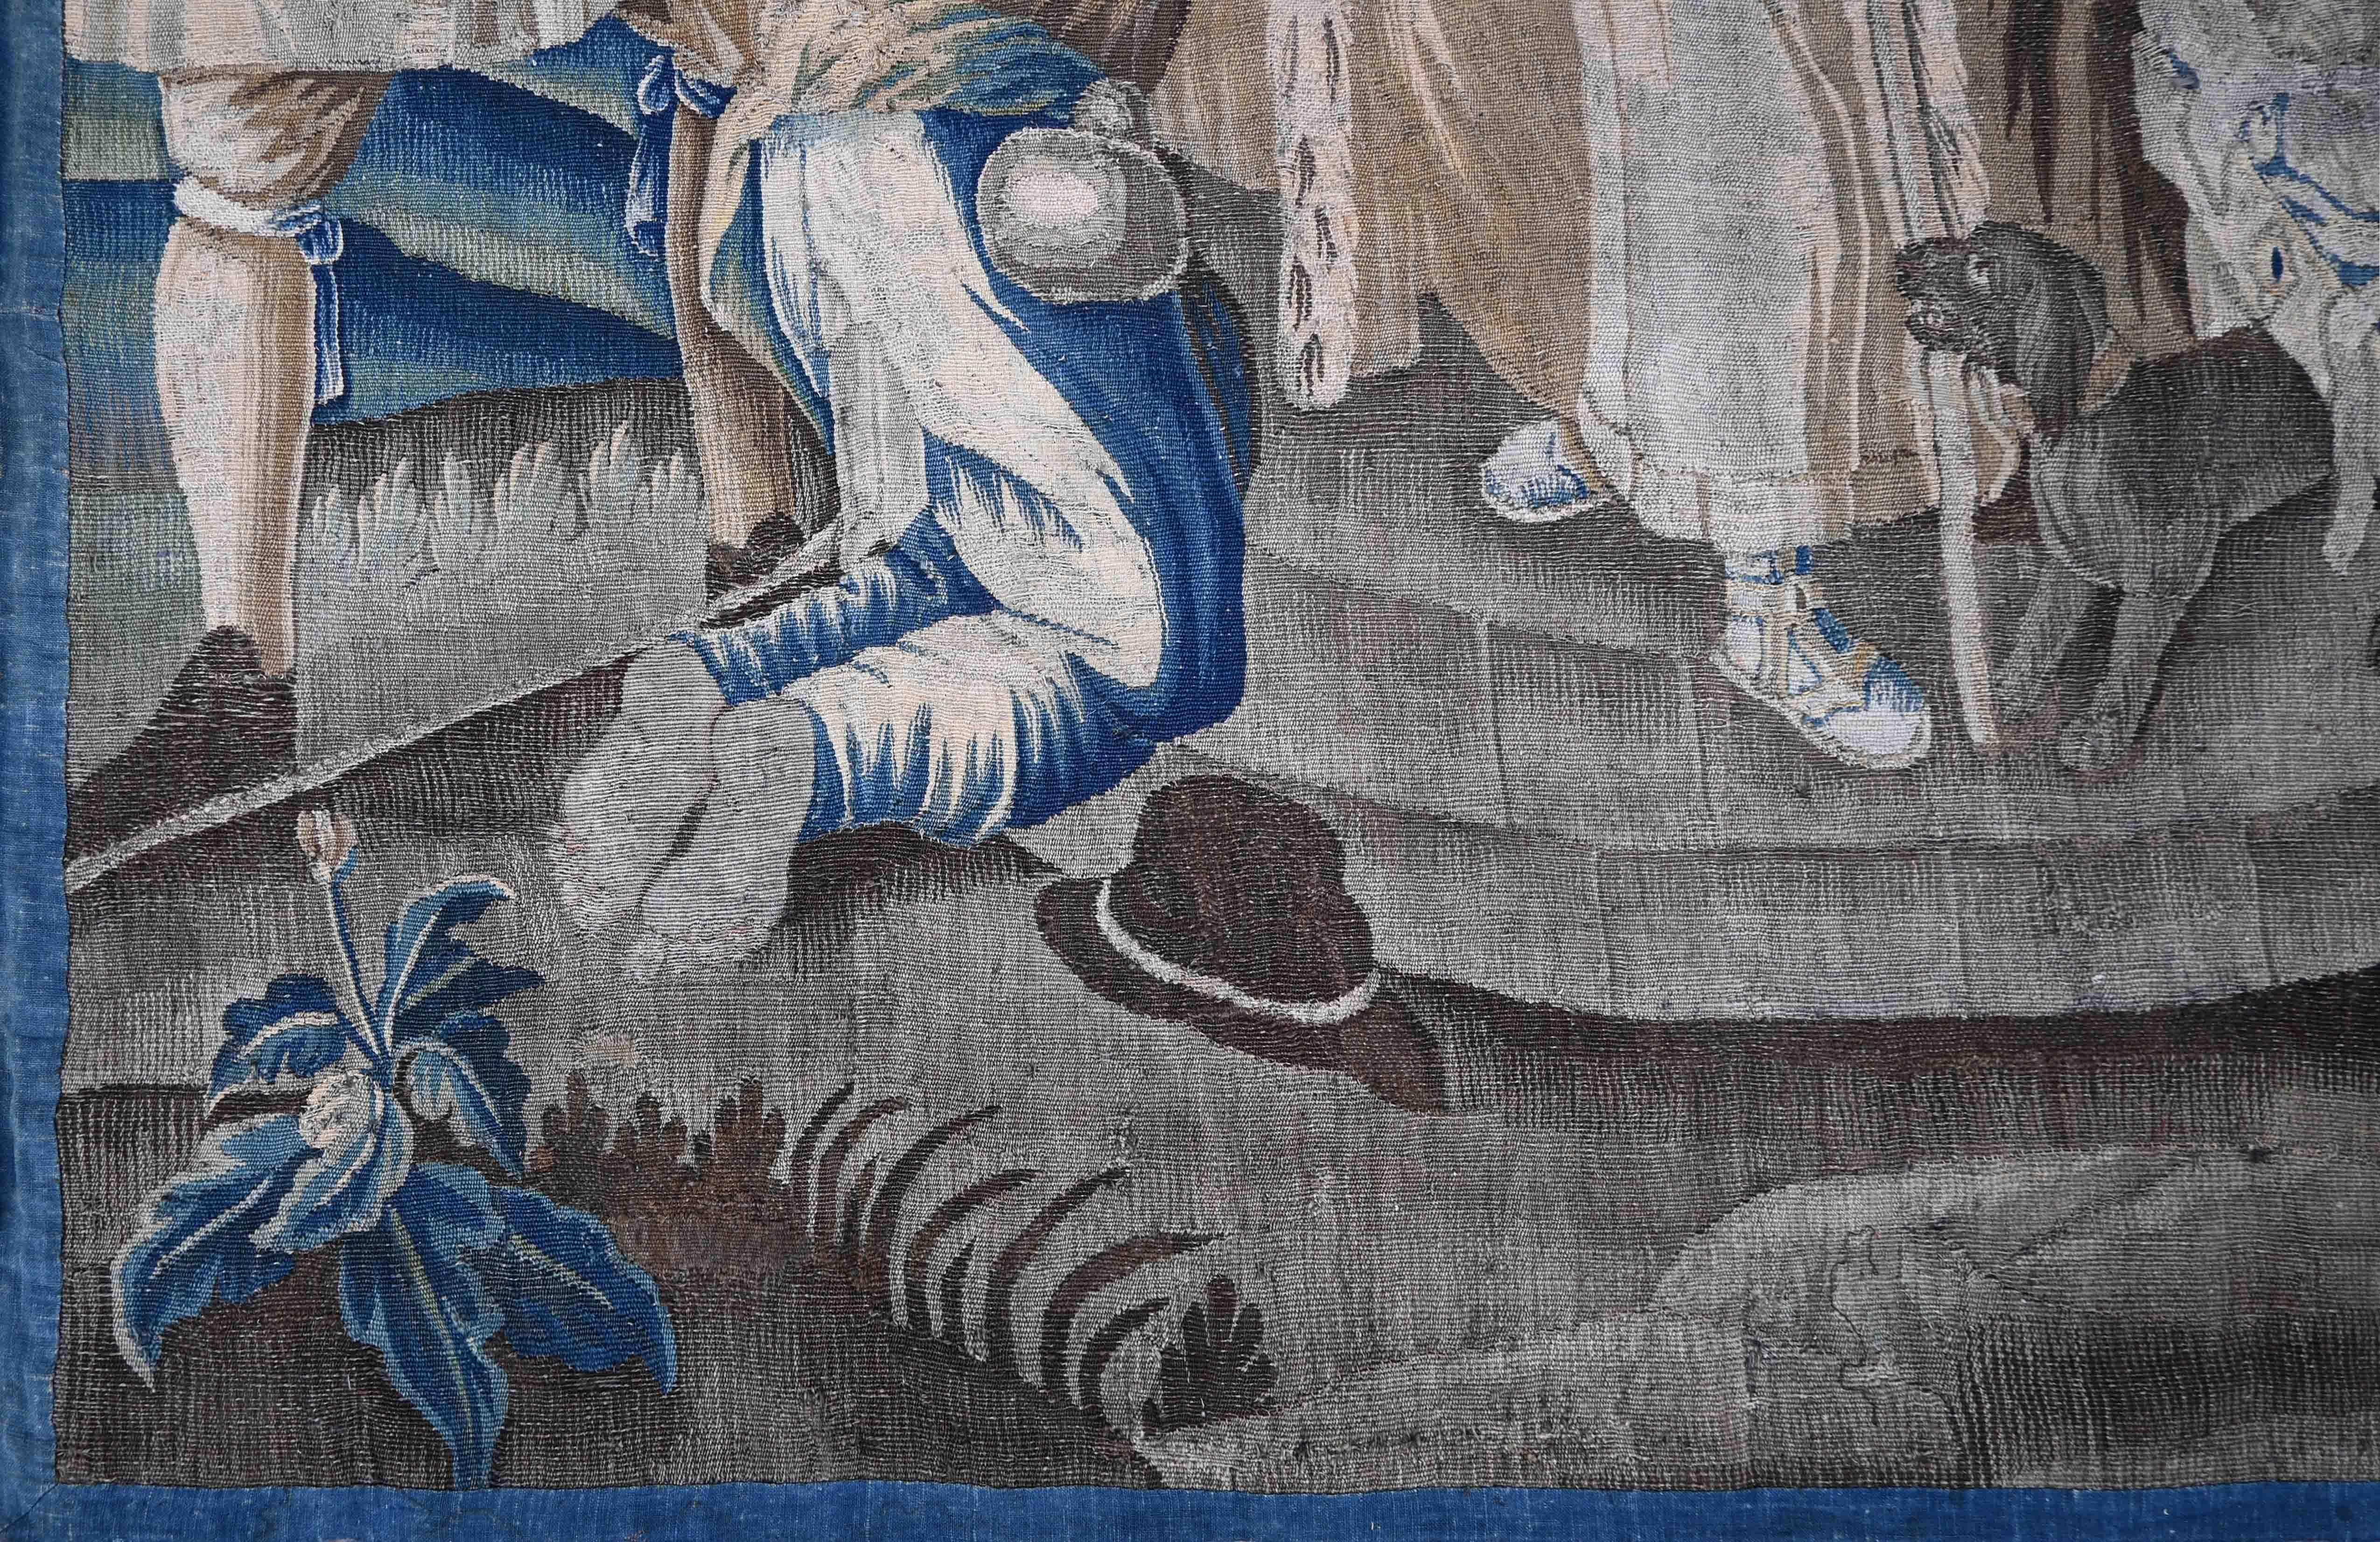 The Return of the Prodigal Son 17th Century Biblical Aubusson Tapestry - N° 1390 For Sale 2